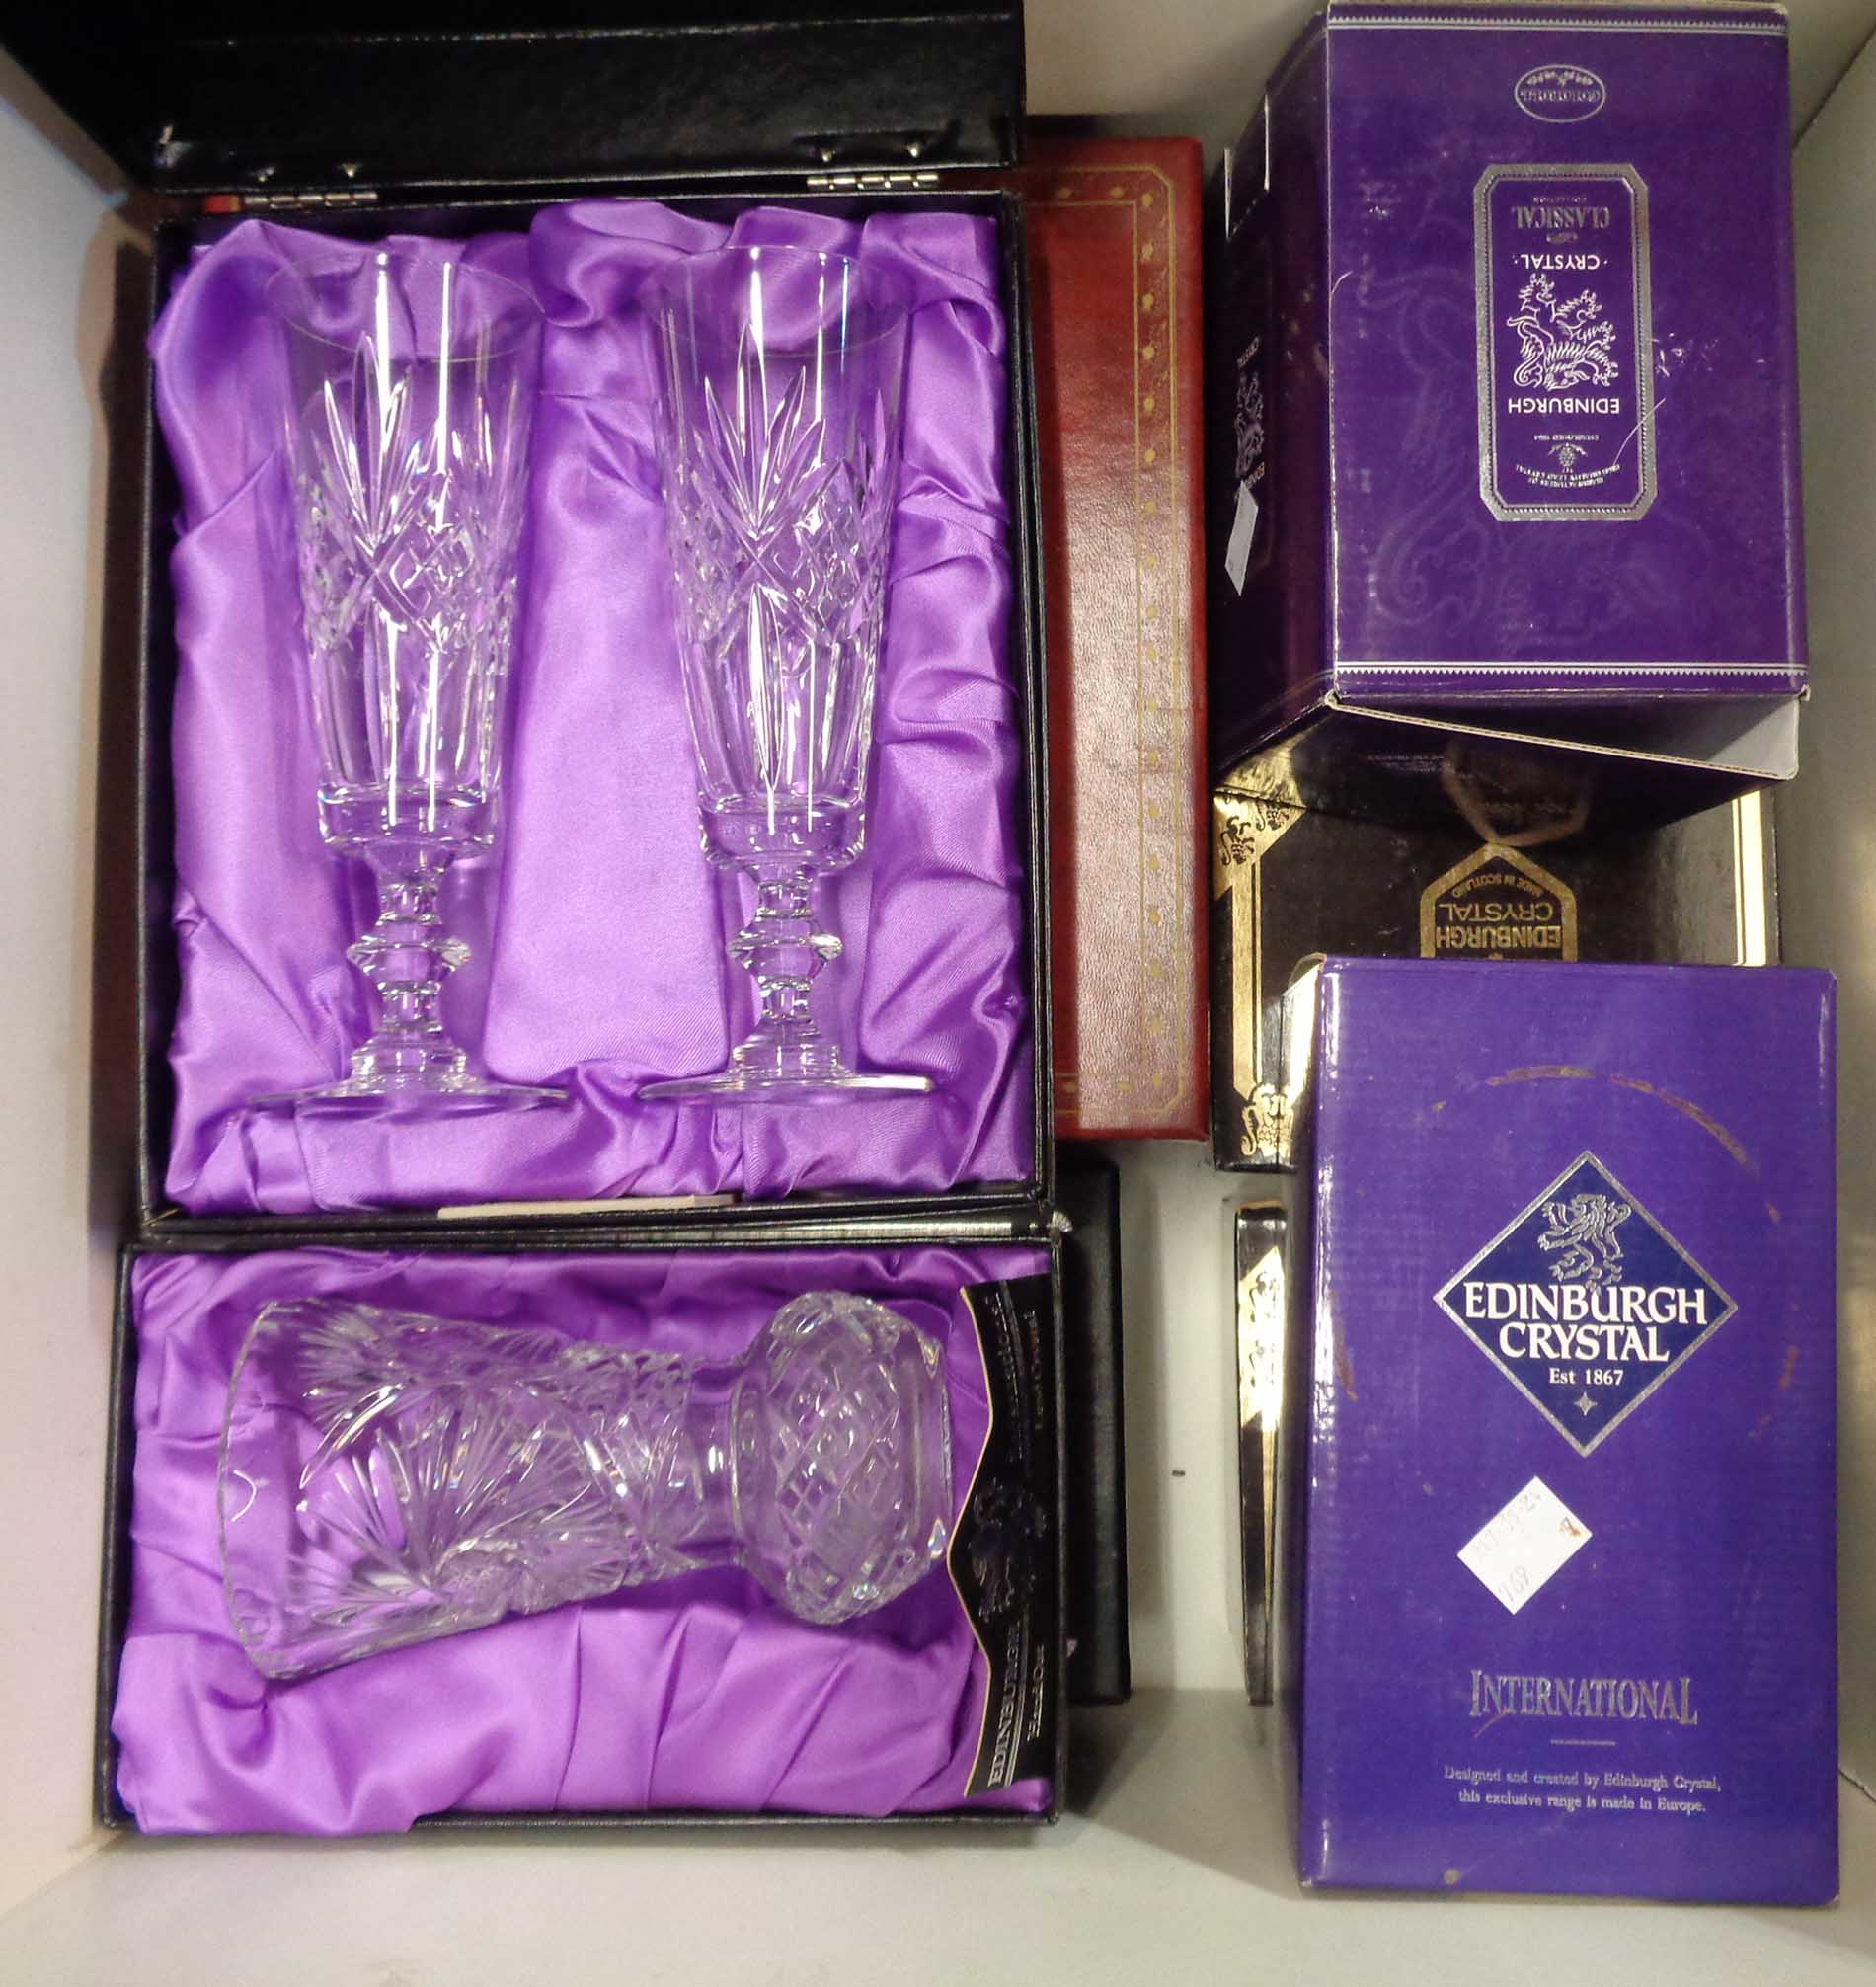 A box containing a quantity of boxed Edinburgh crystal glassware including drinking glasses, etc.